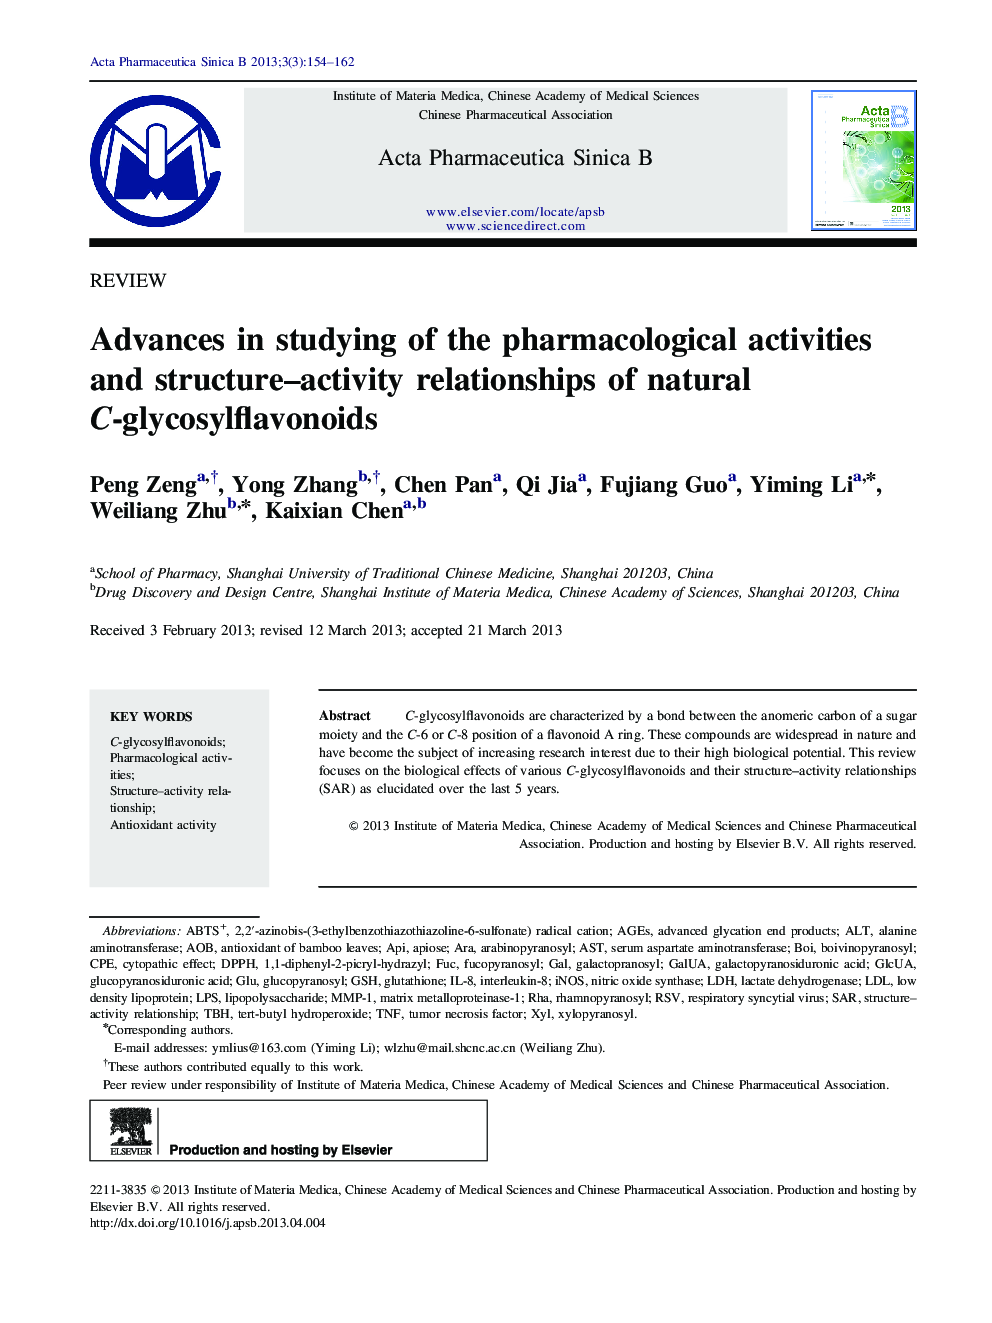 Advances in studying of the pharmacological activities and structure–activity relationships of natural C-glycosylflavonoids 